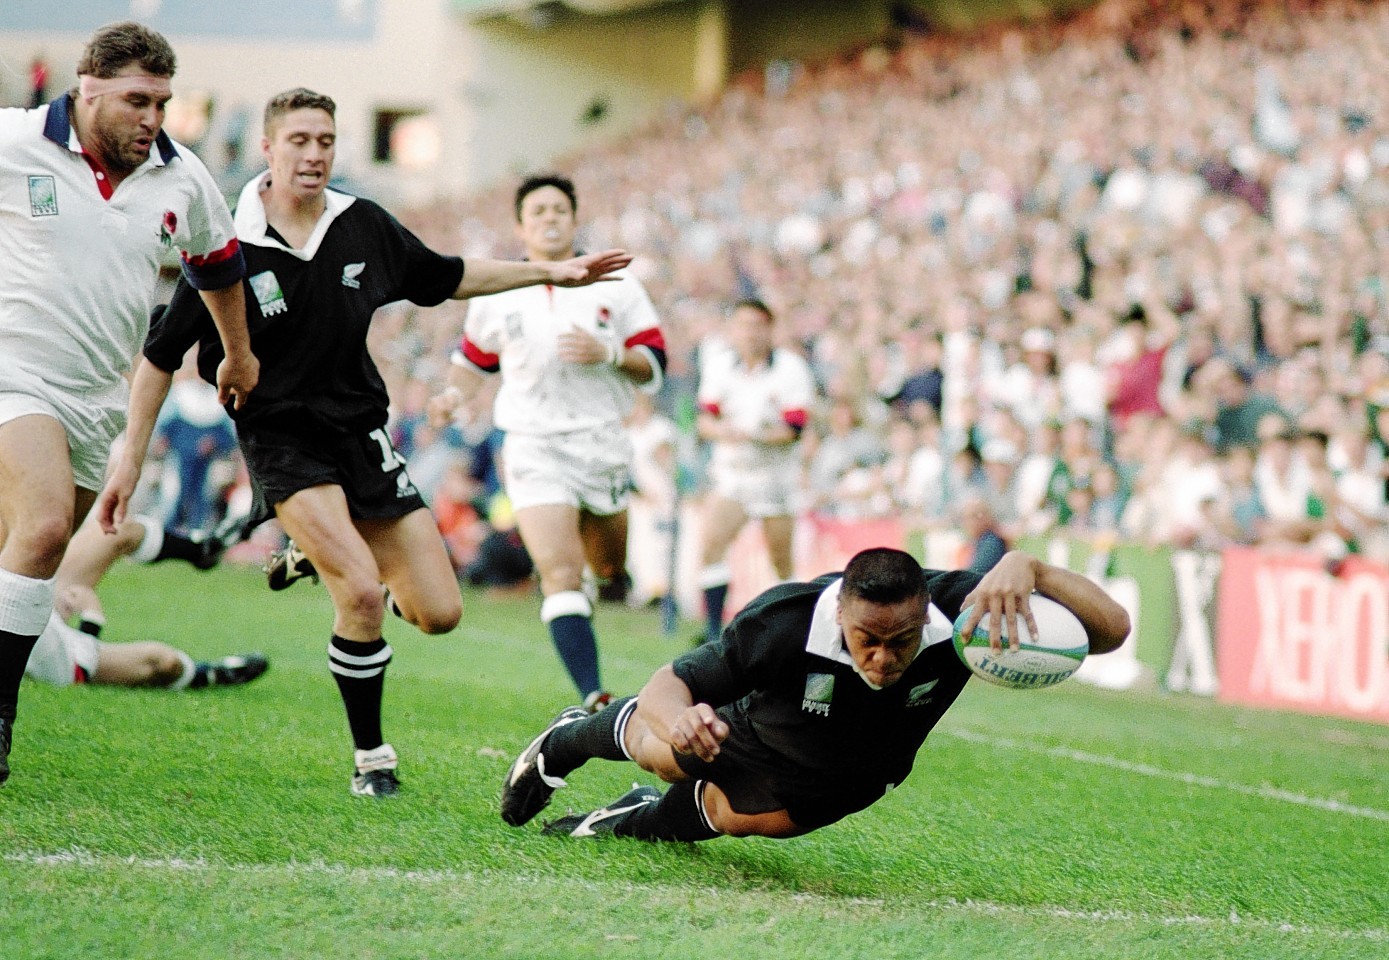 Lomu dives over for a try during the 1995 Rugby World Cup match between England and New Zealand